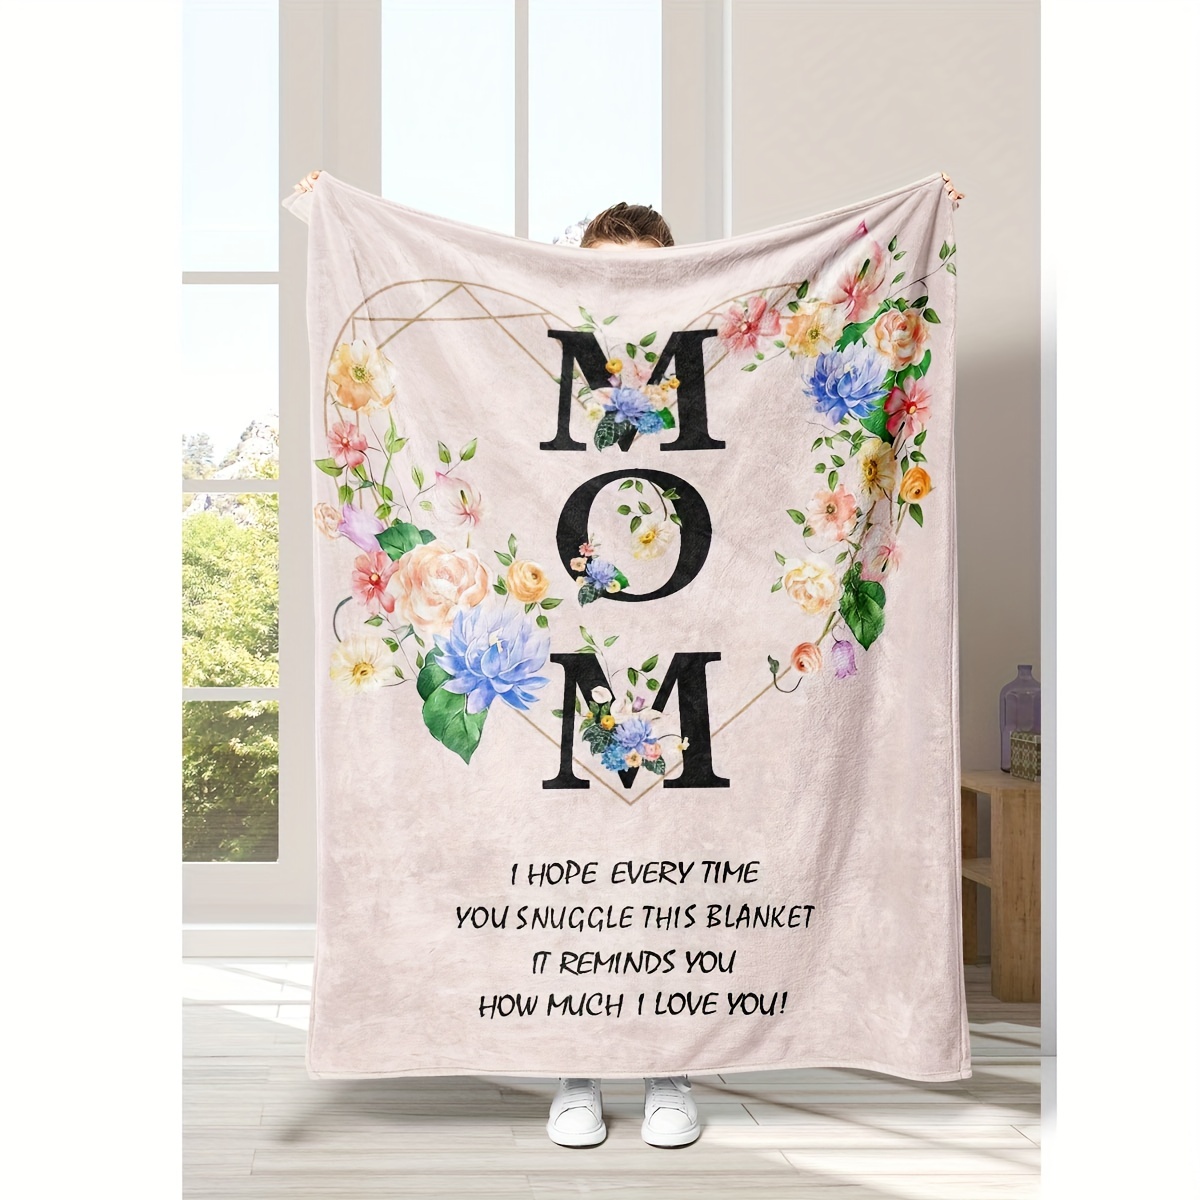 Gifts for Mom, Blanket for Mom Gifts, Christmas Gifts for Mom from Daughter, Mom Birthday Gifts, Gift for Mom from Son, Present I Love You Mom Blanket